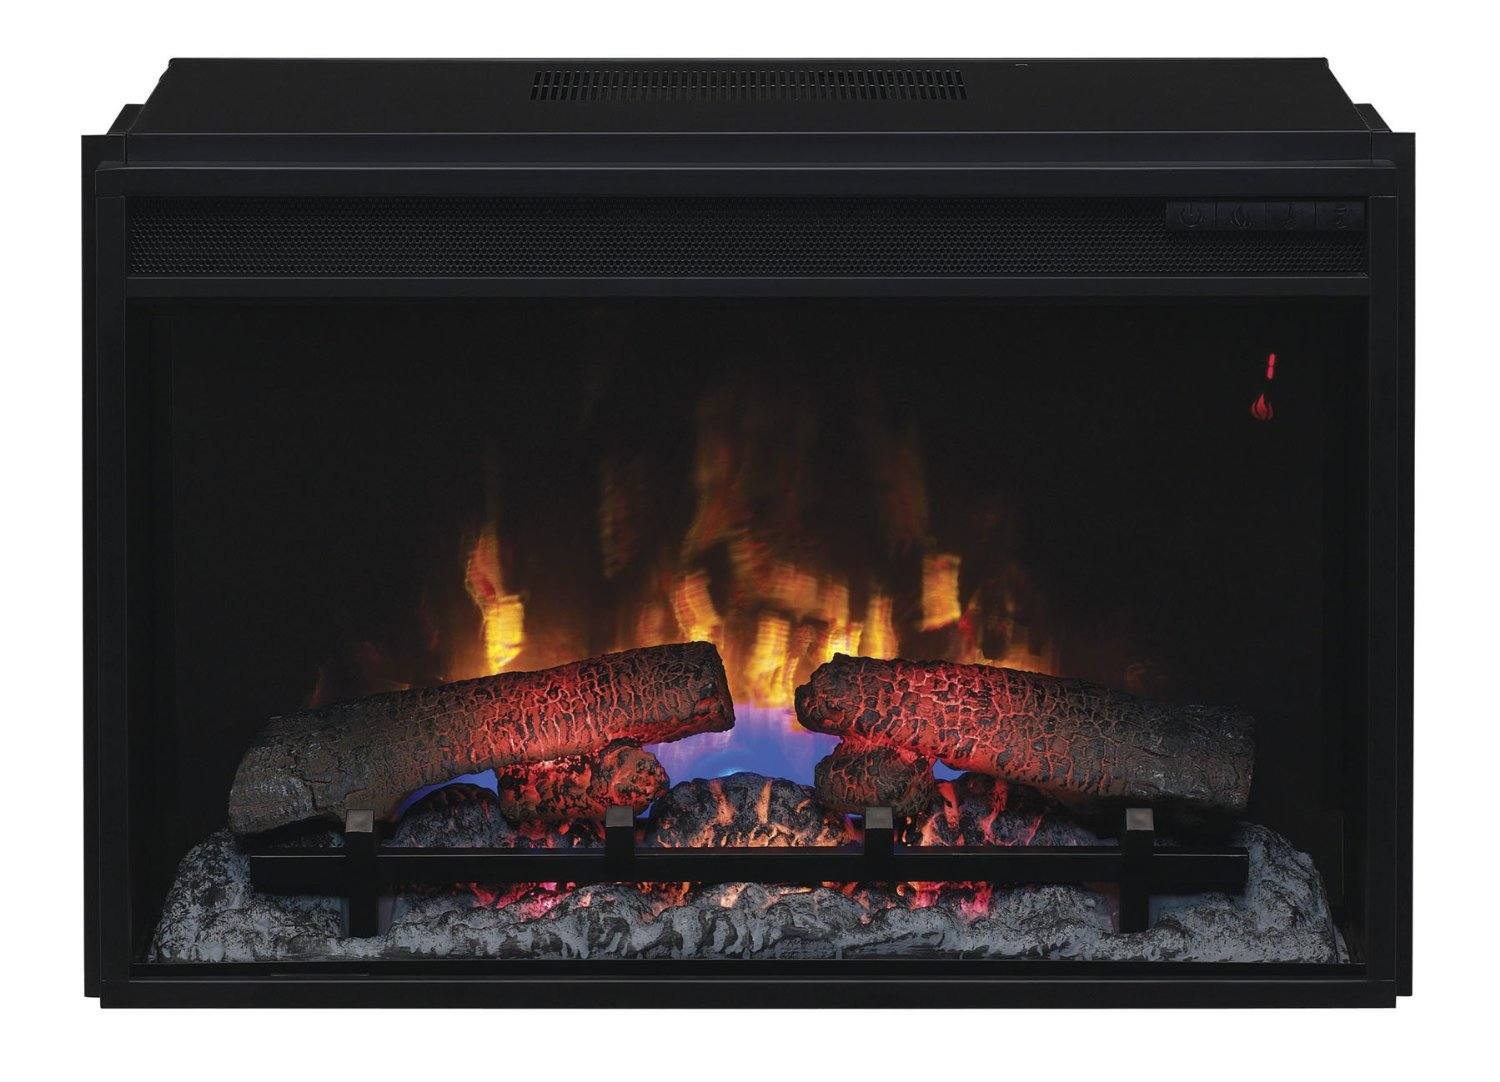 Gel Fuel Fireplace Insert Fresh Best Fireplace Inserts Reviews 2019 – Gas Wood Electric